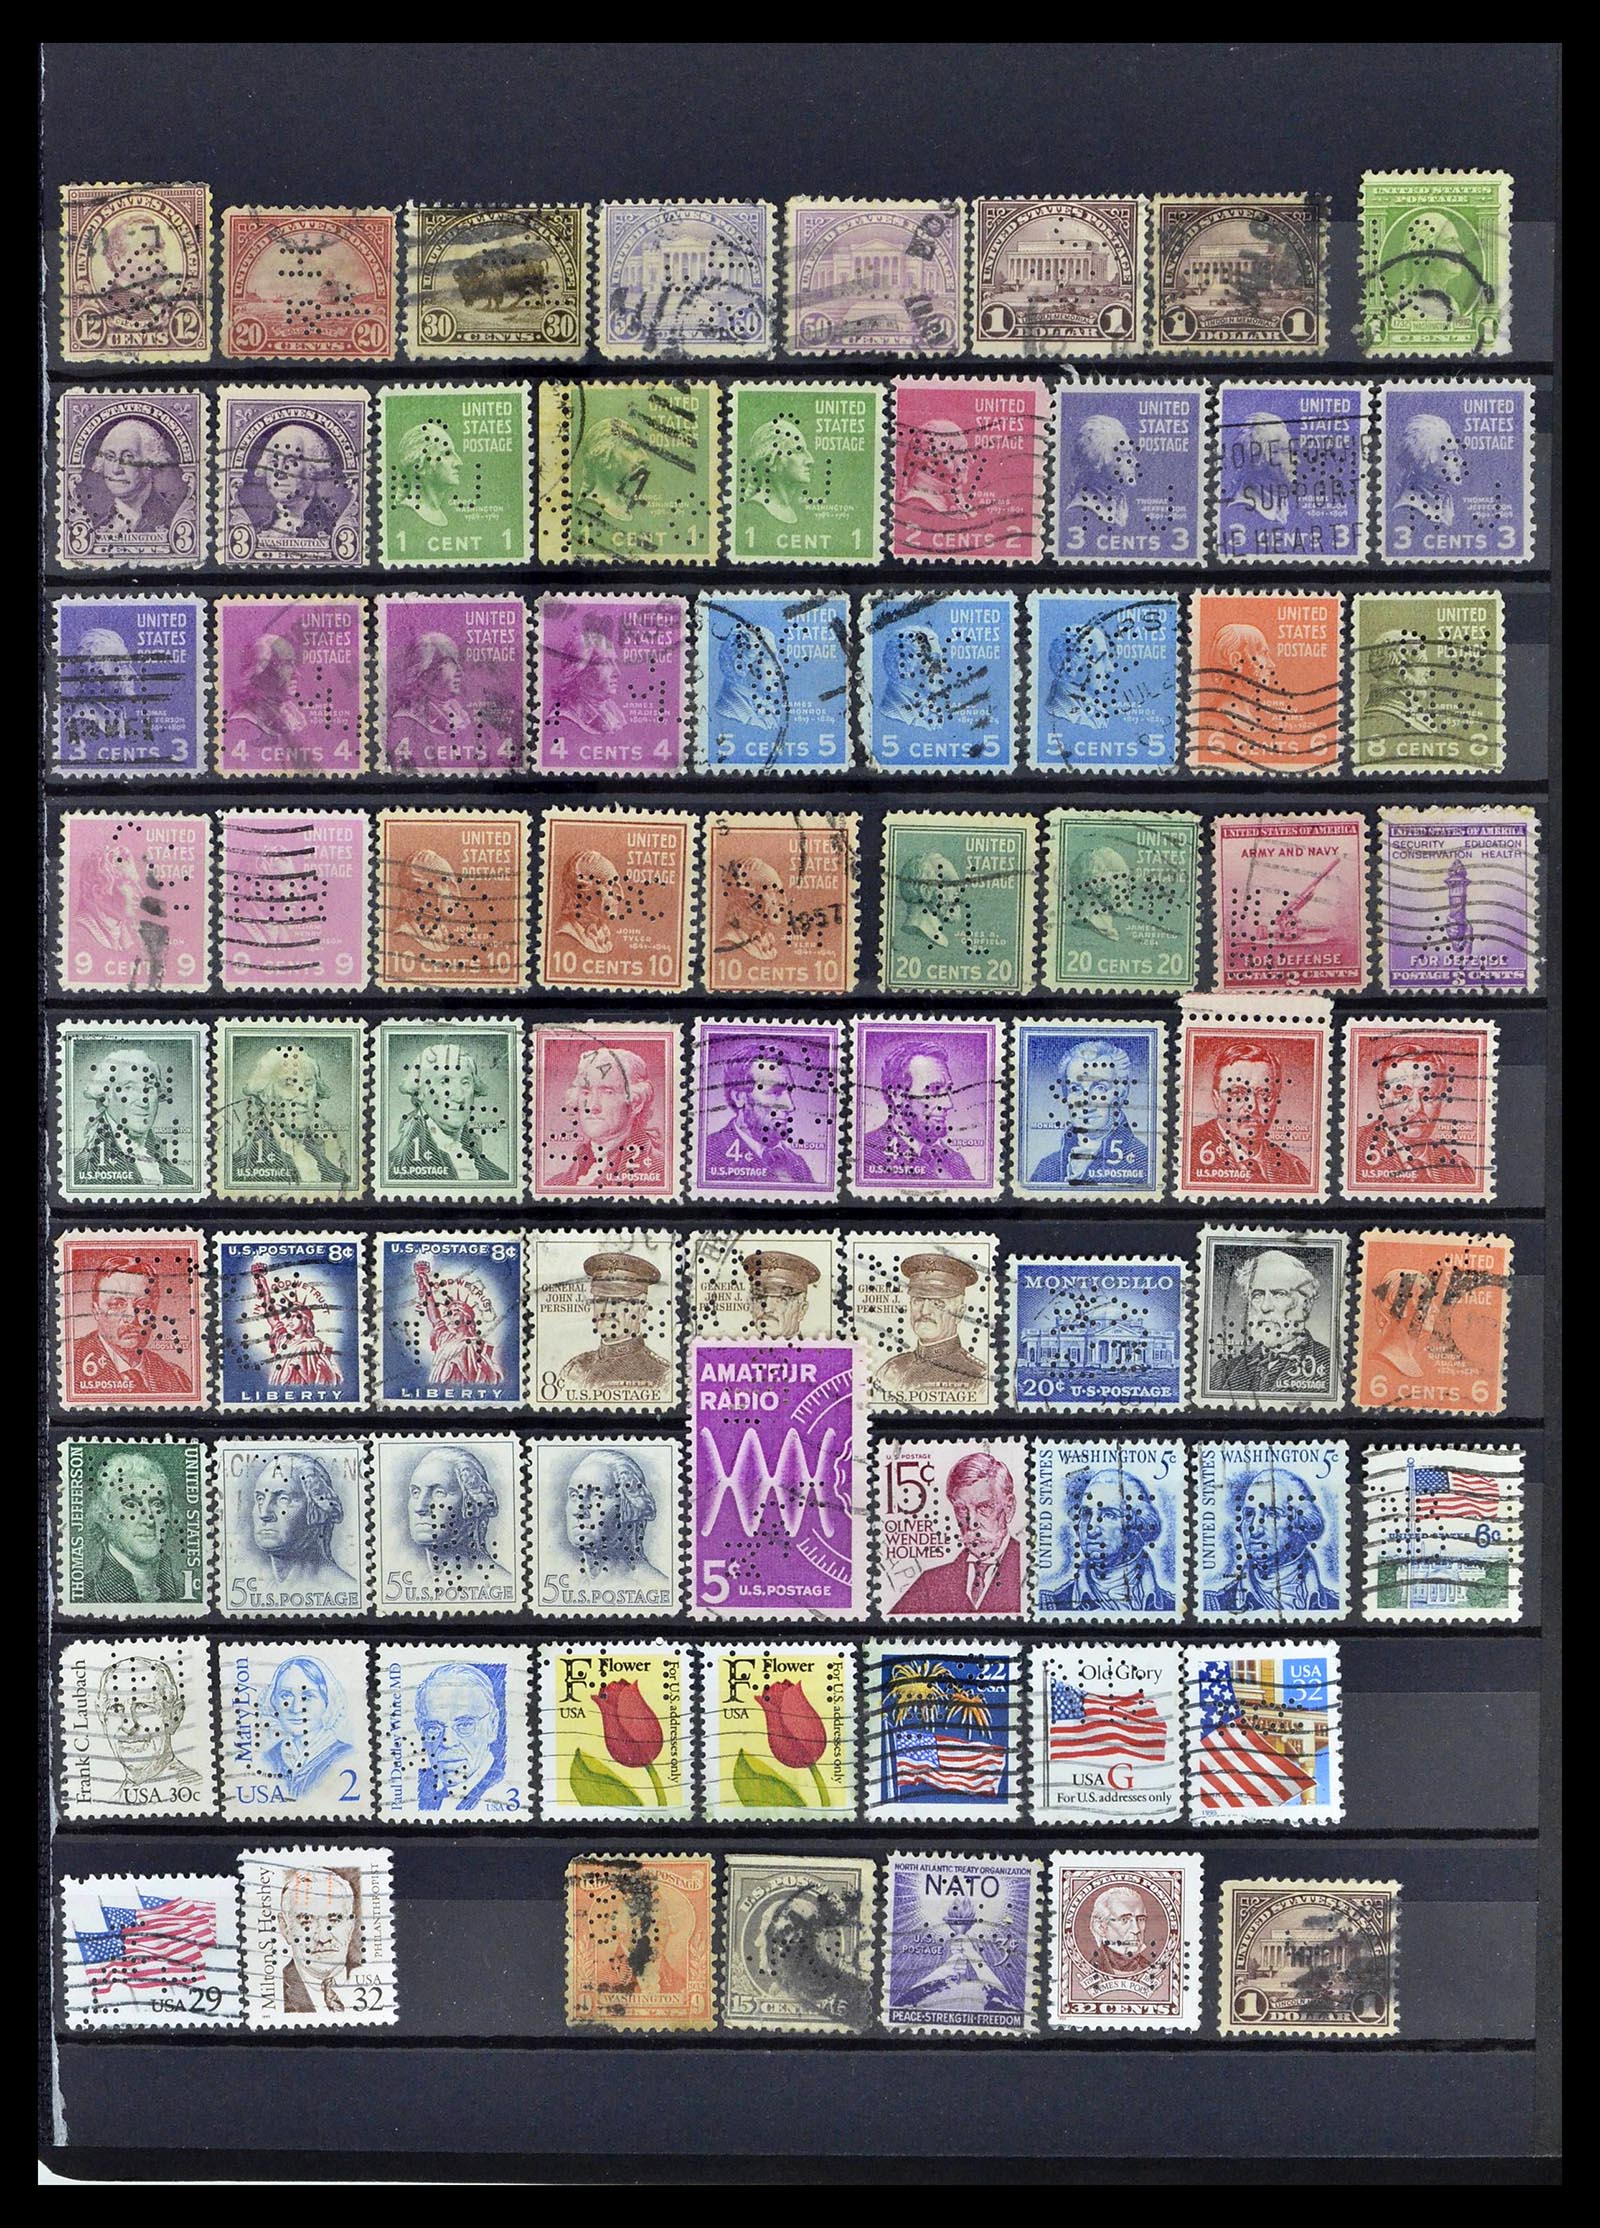 39196 0138 - Stamp collection 39196 Great Britain 1844-1955.